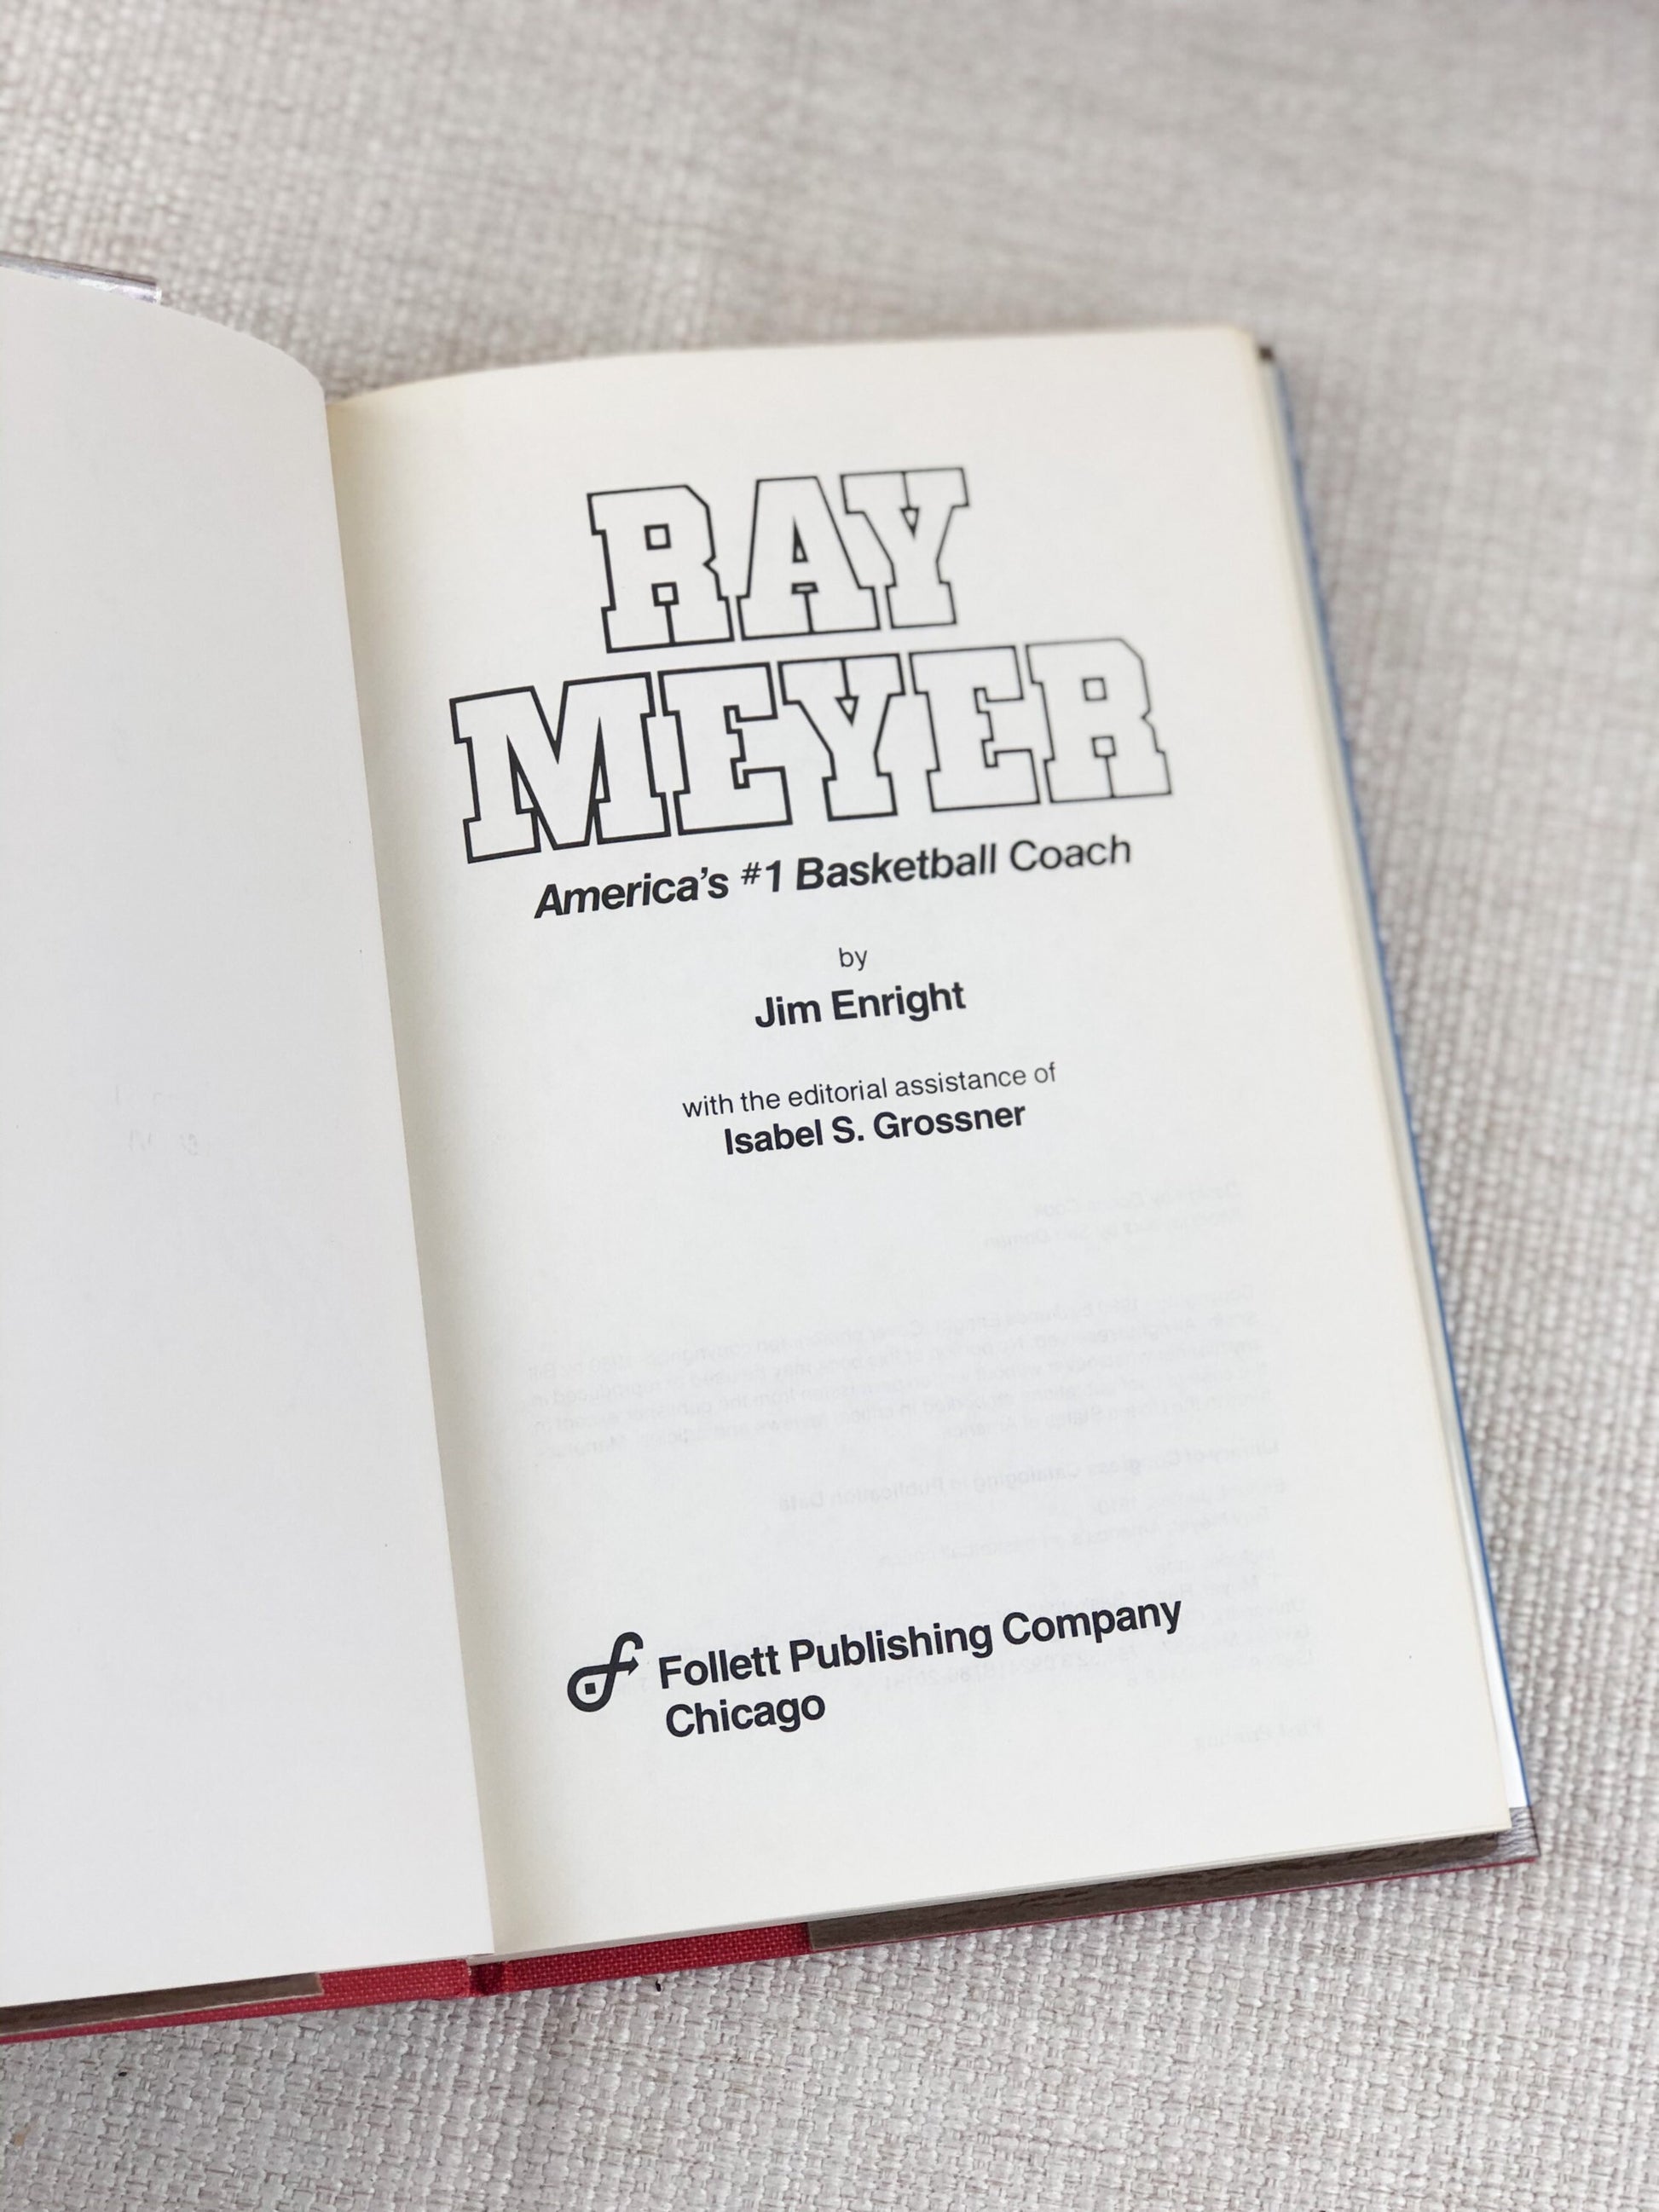 Signed Book / Ray Meyer America's #1 Basketball Coach